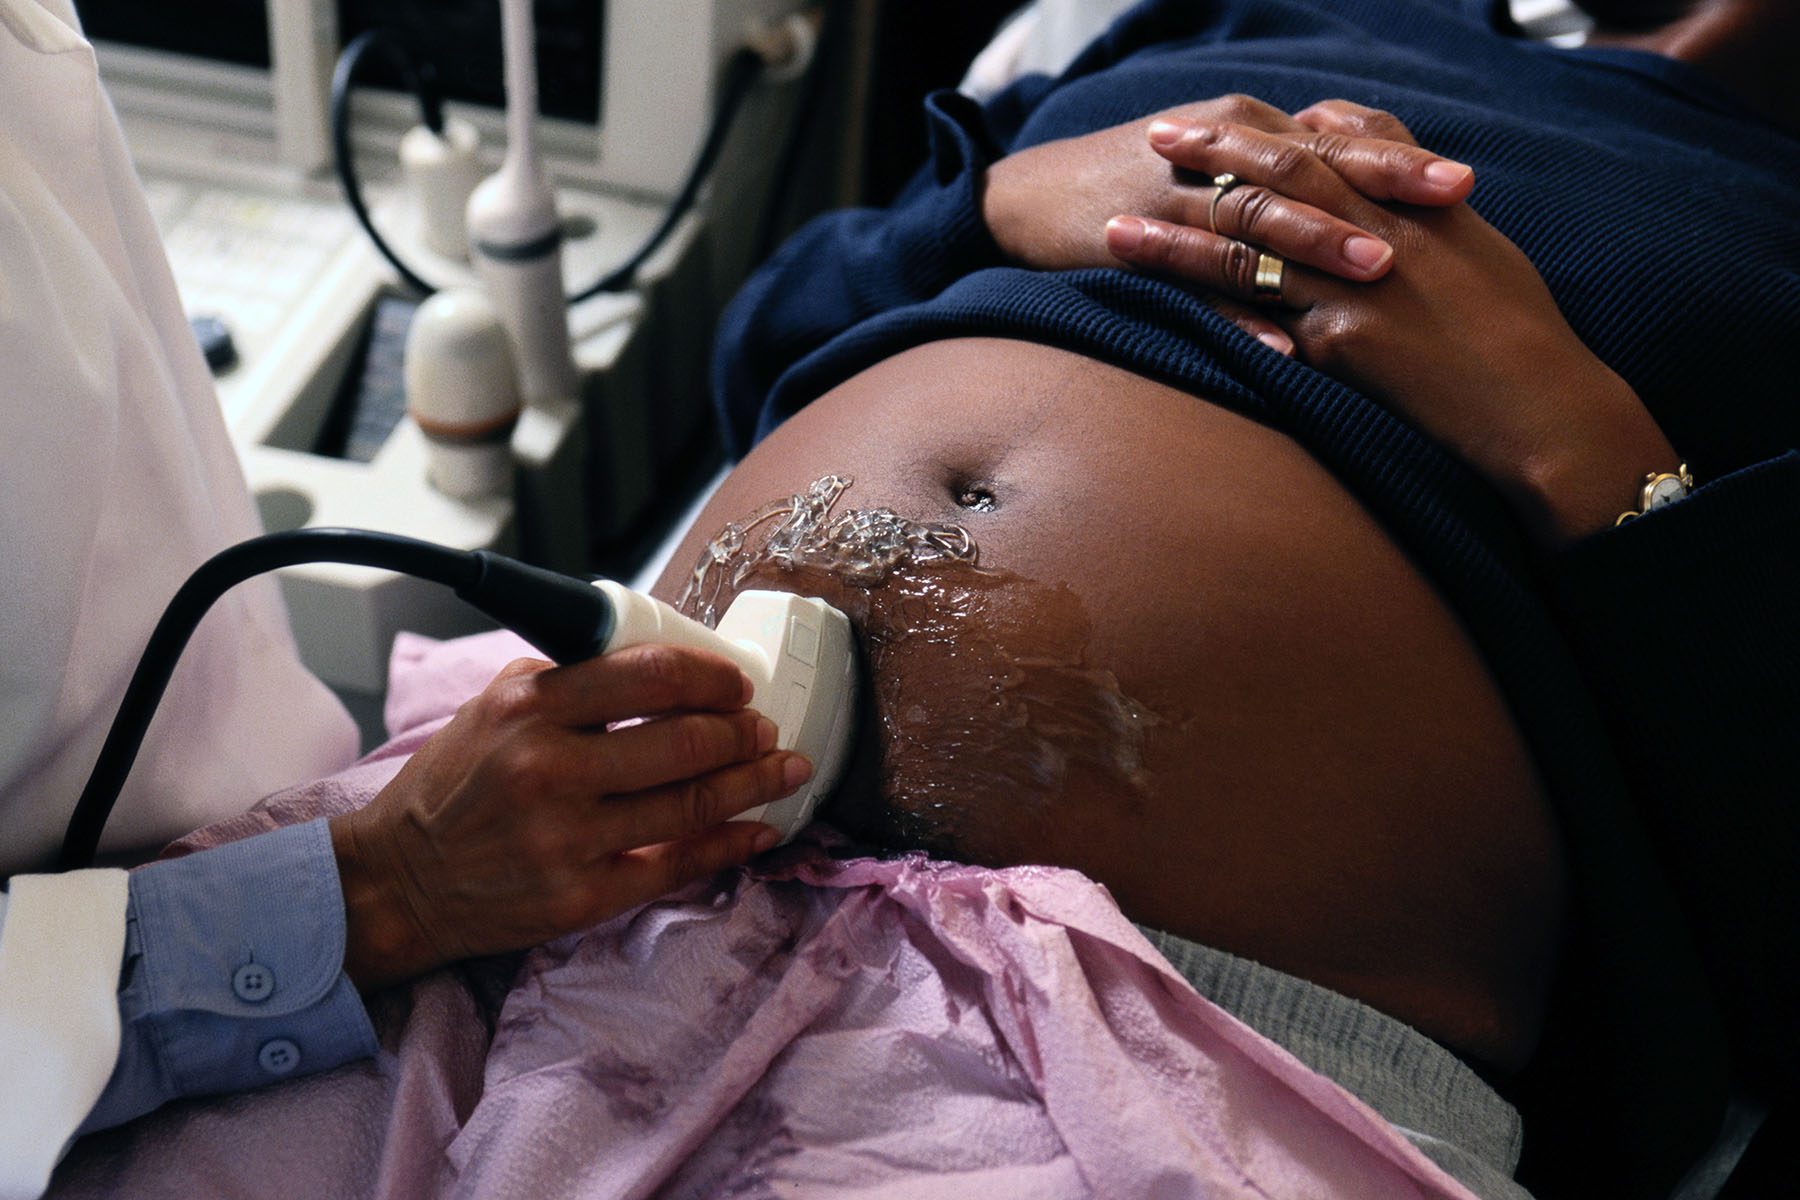 A doctor gives a pregnant person an ultrasound as they lays.